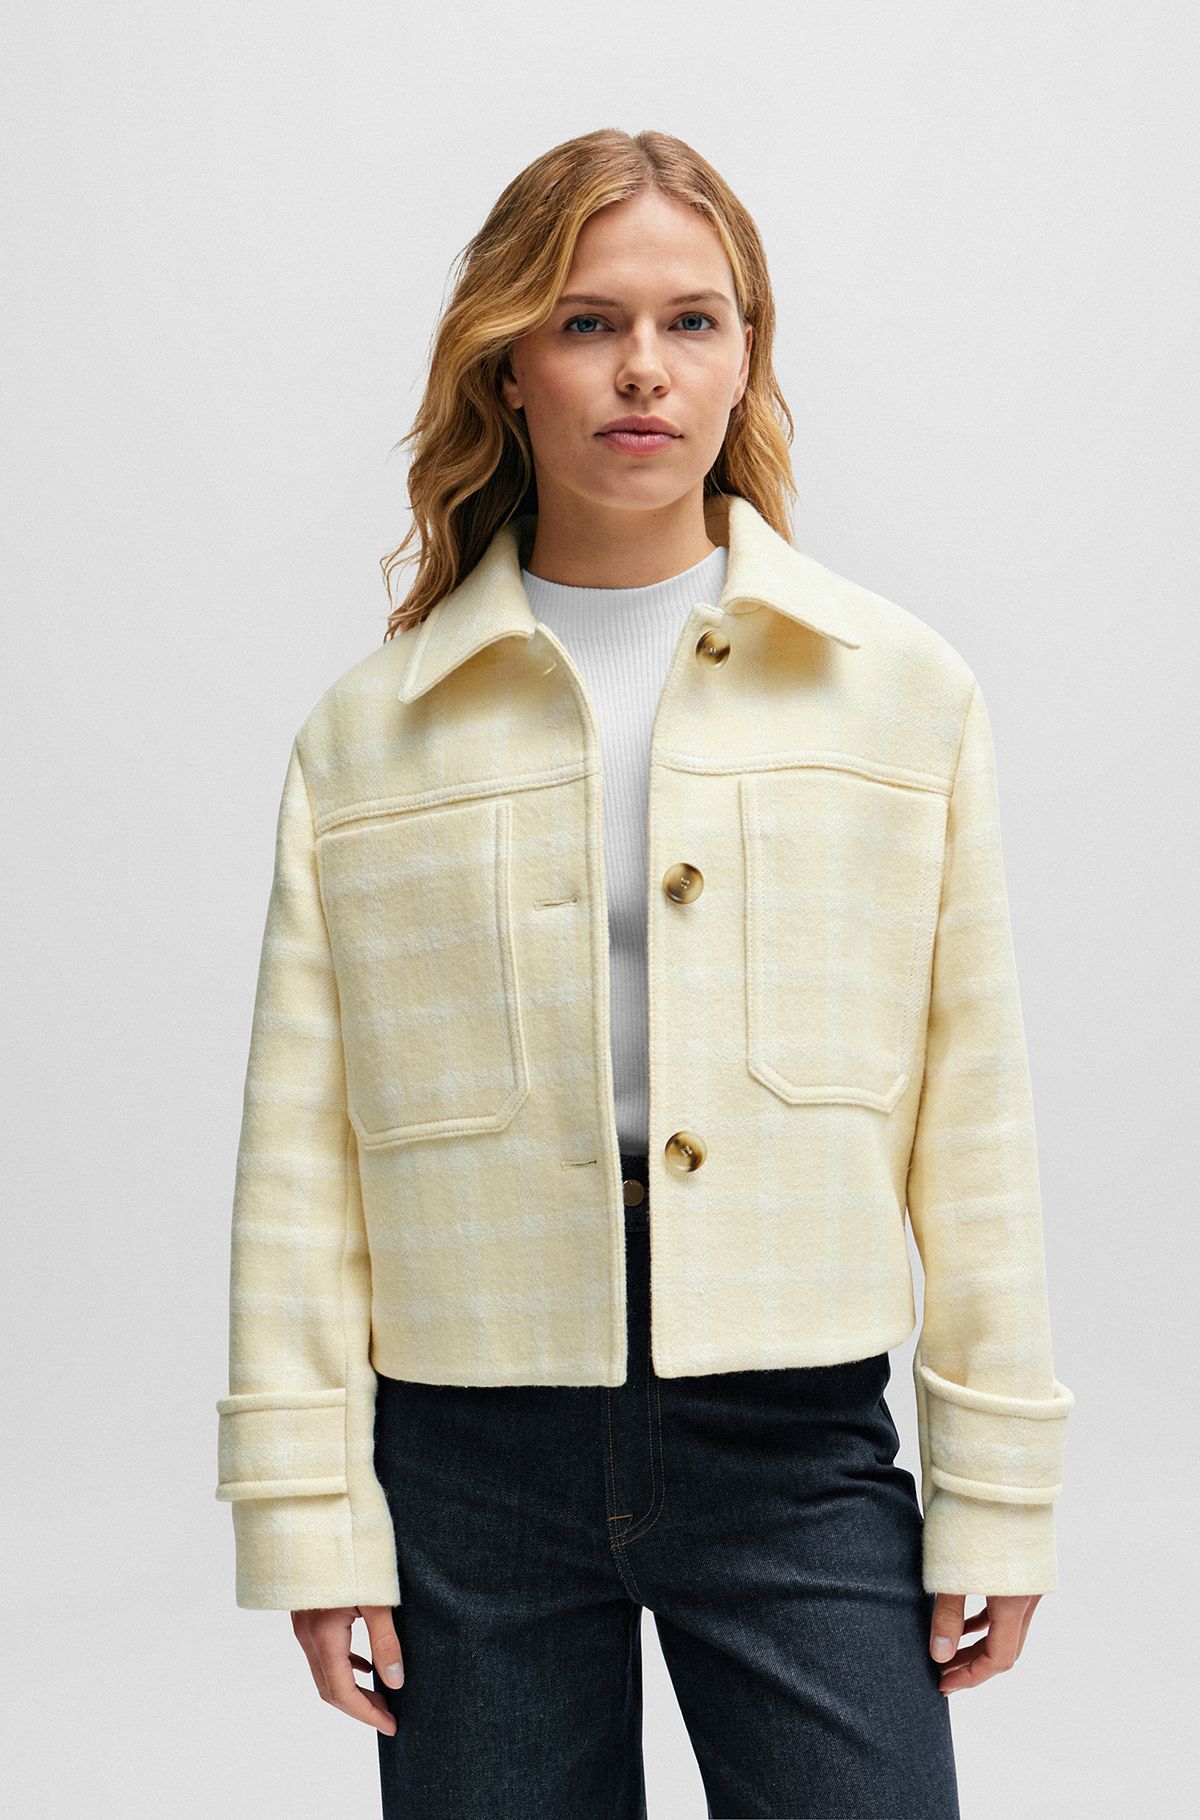 Relaxed-fit jacket in Italian checked cloth, Patterned